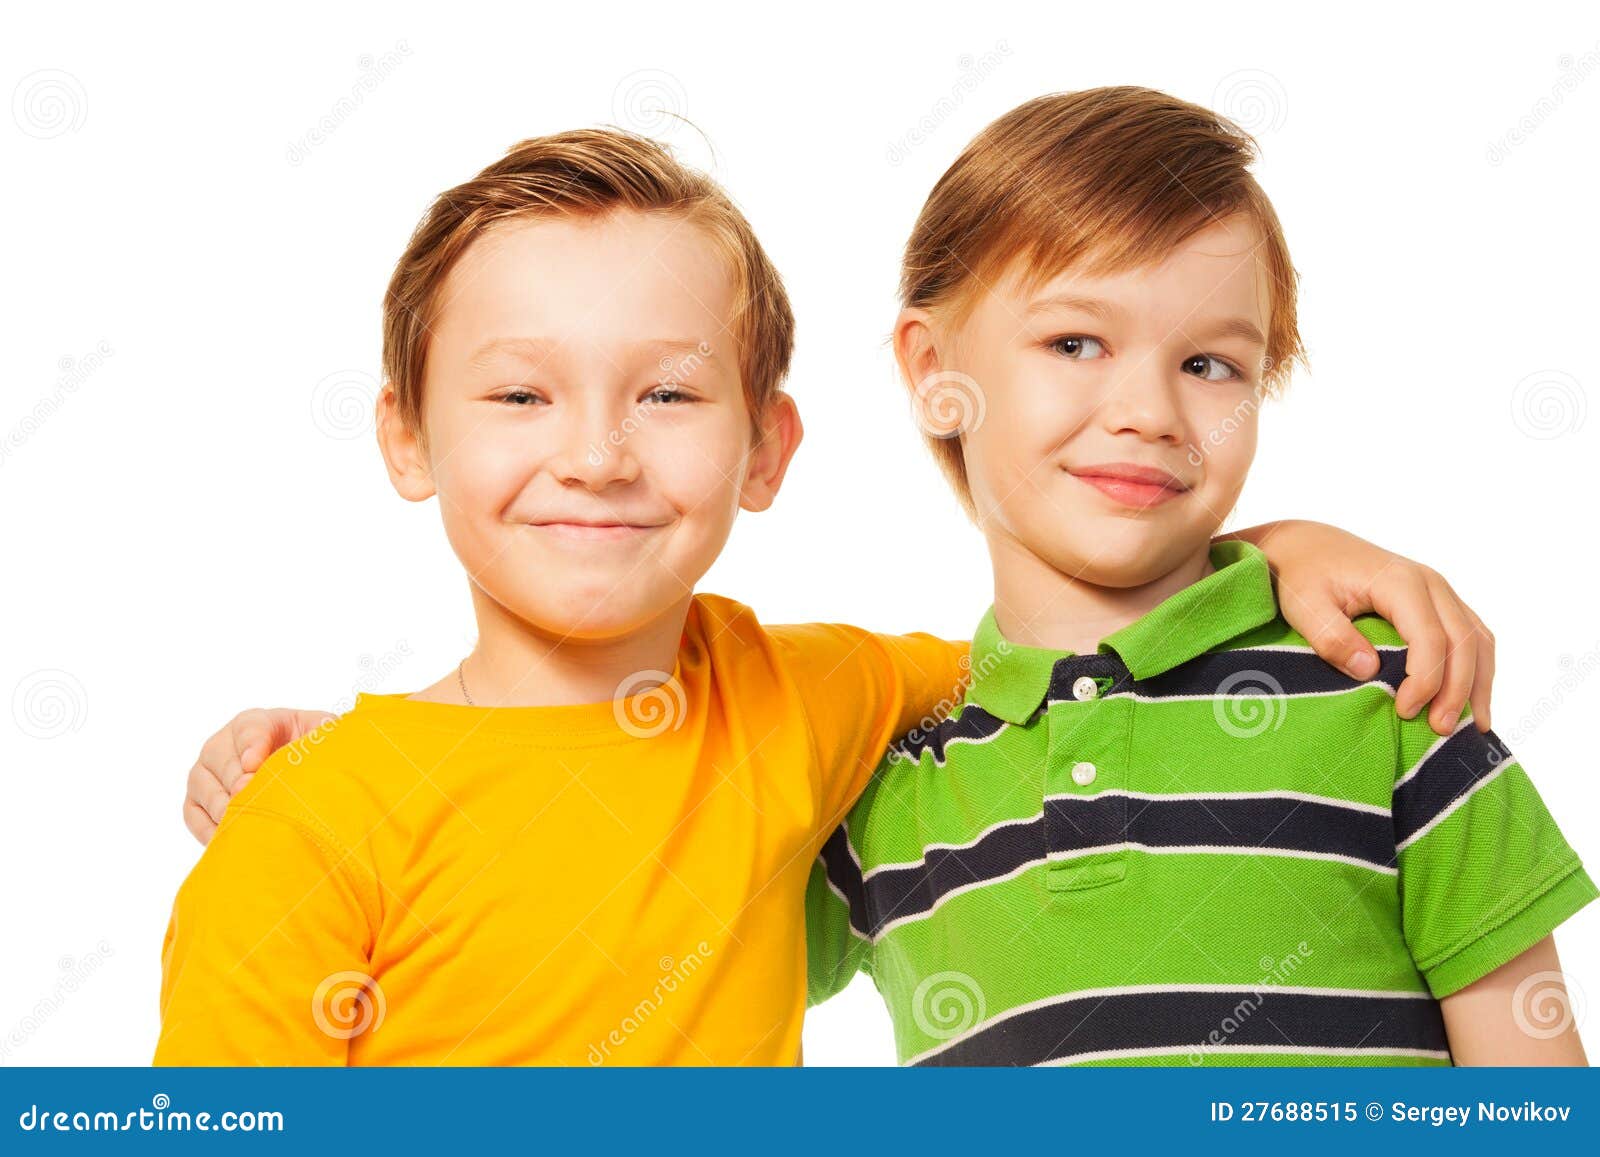 Two Kids Friends Standing Together Stock Image - Image of ...